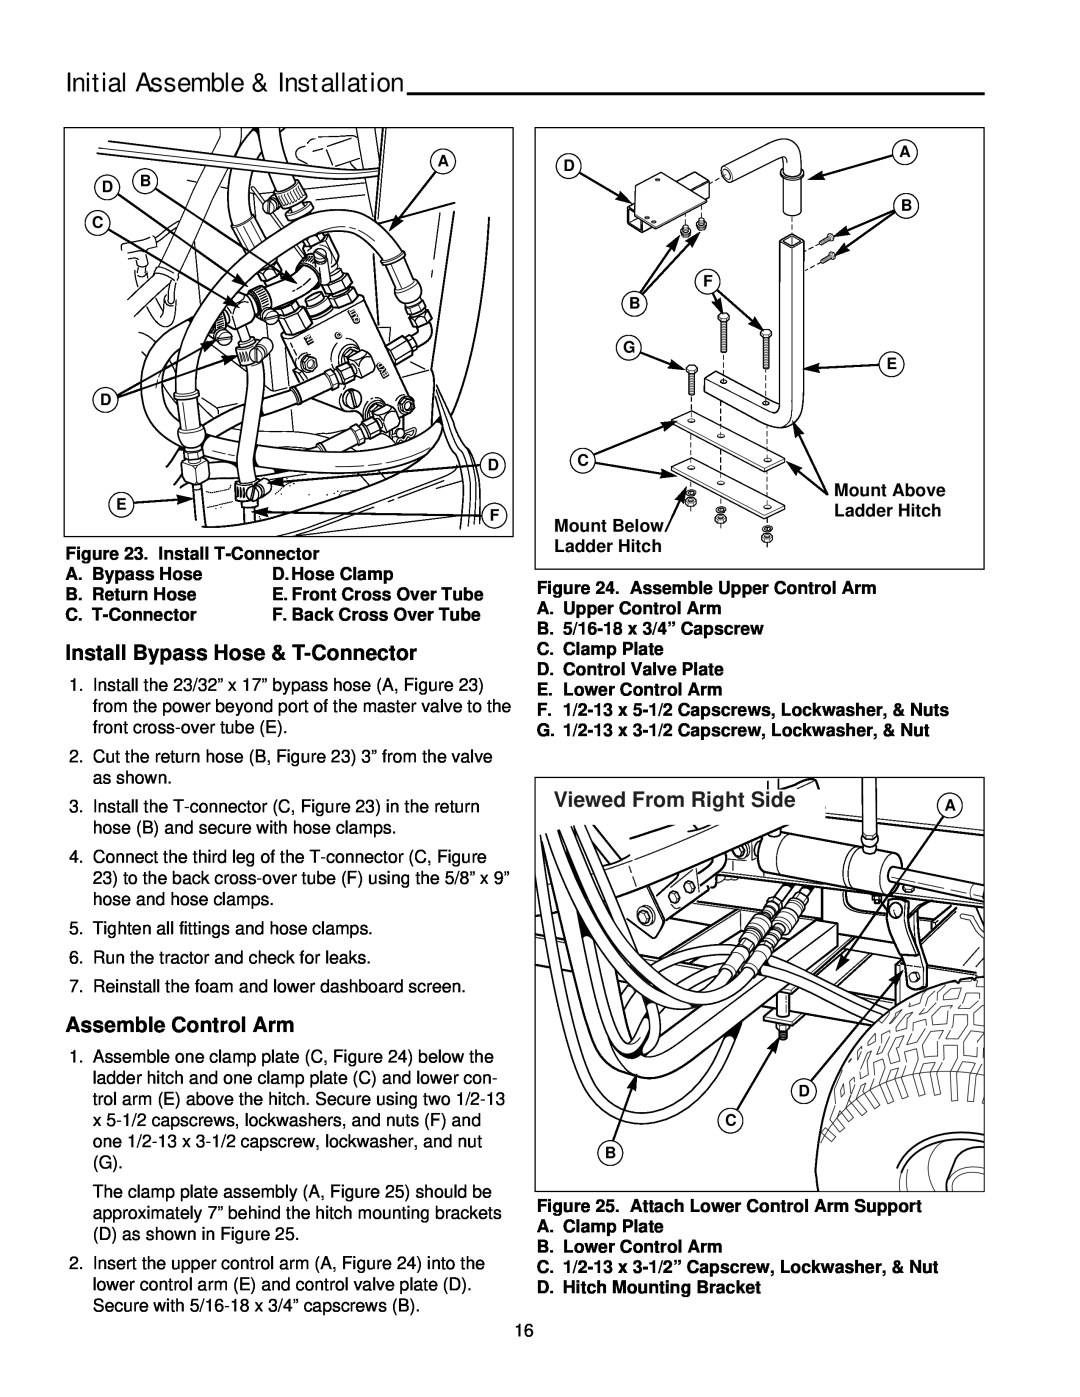 Snapper 2137 manual Initial Assemble & Installation, Install Bypass Hose & T-Connector, Assemble Control Arm 